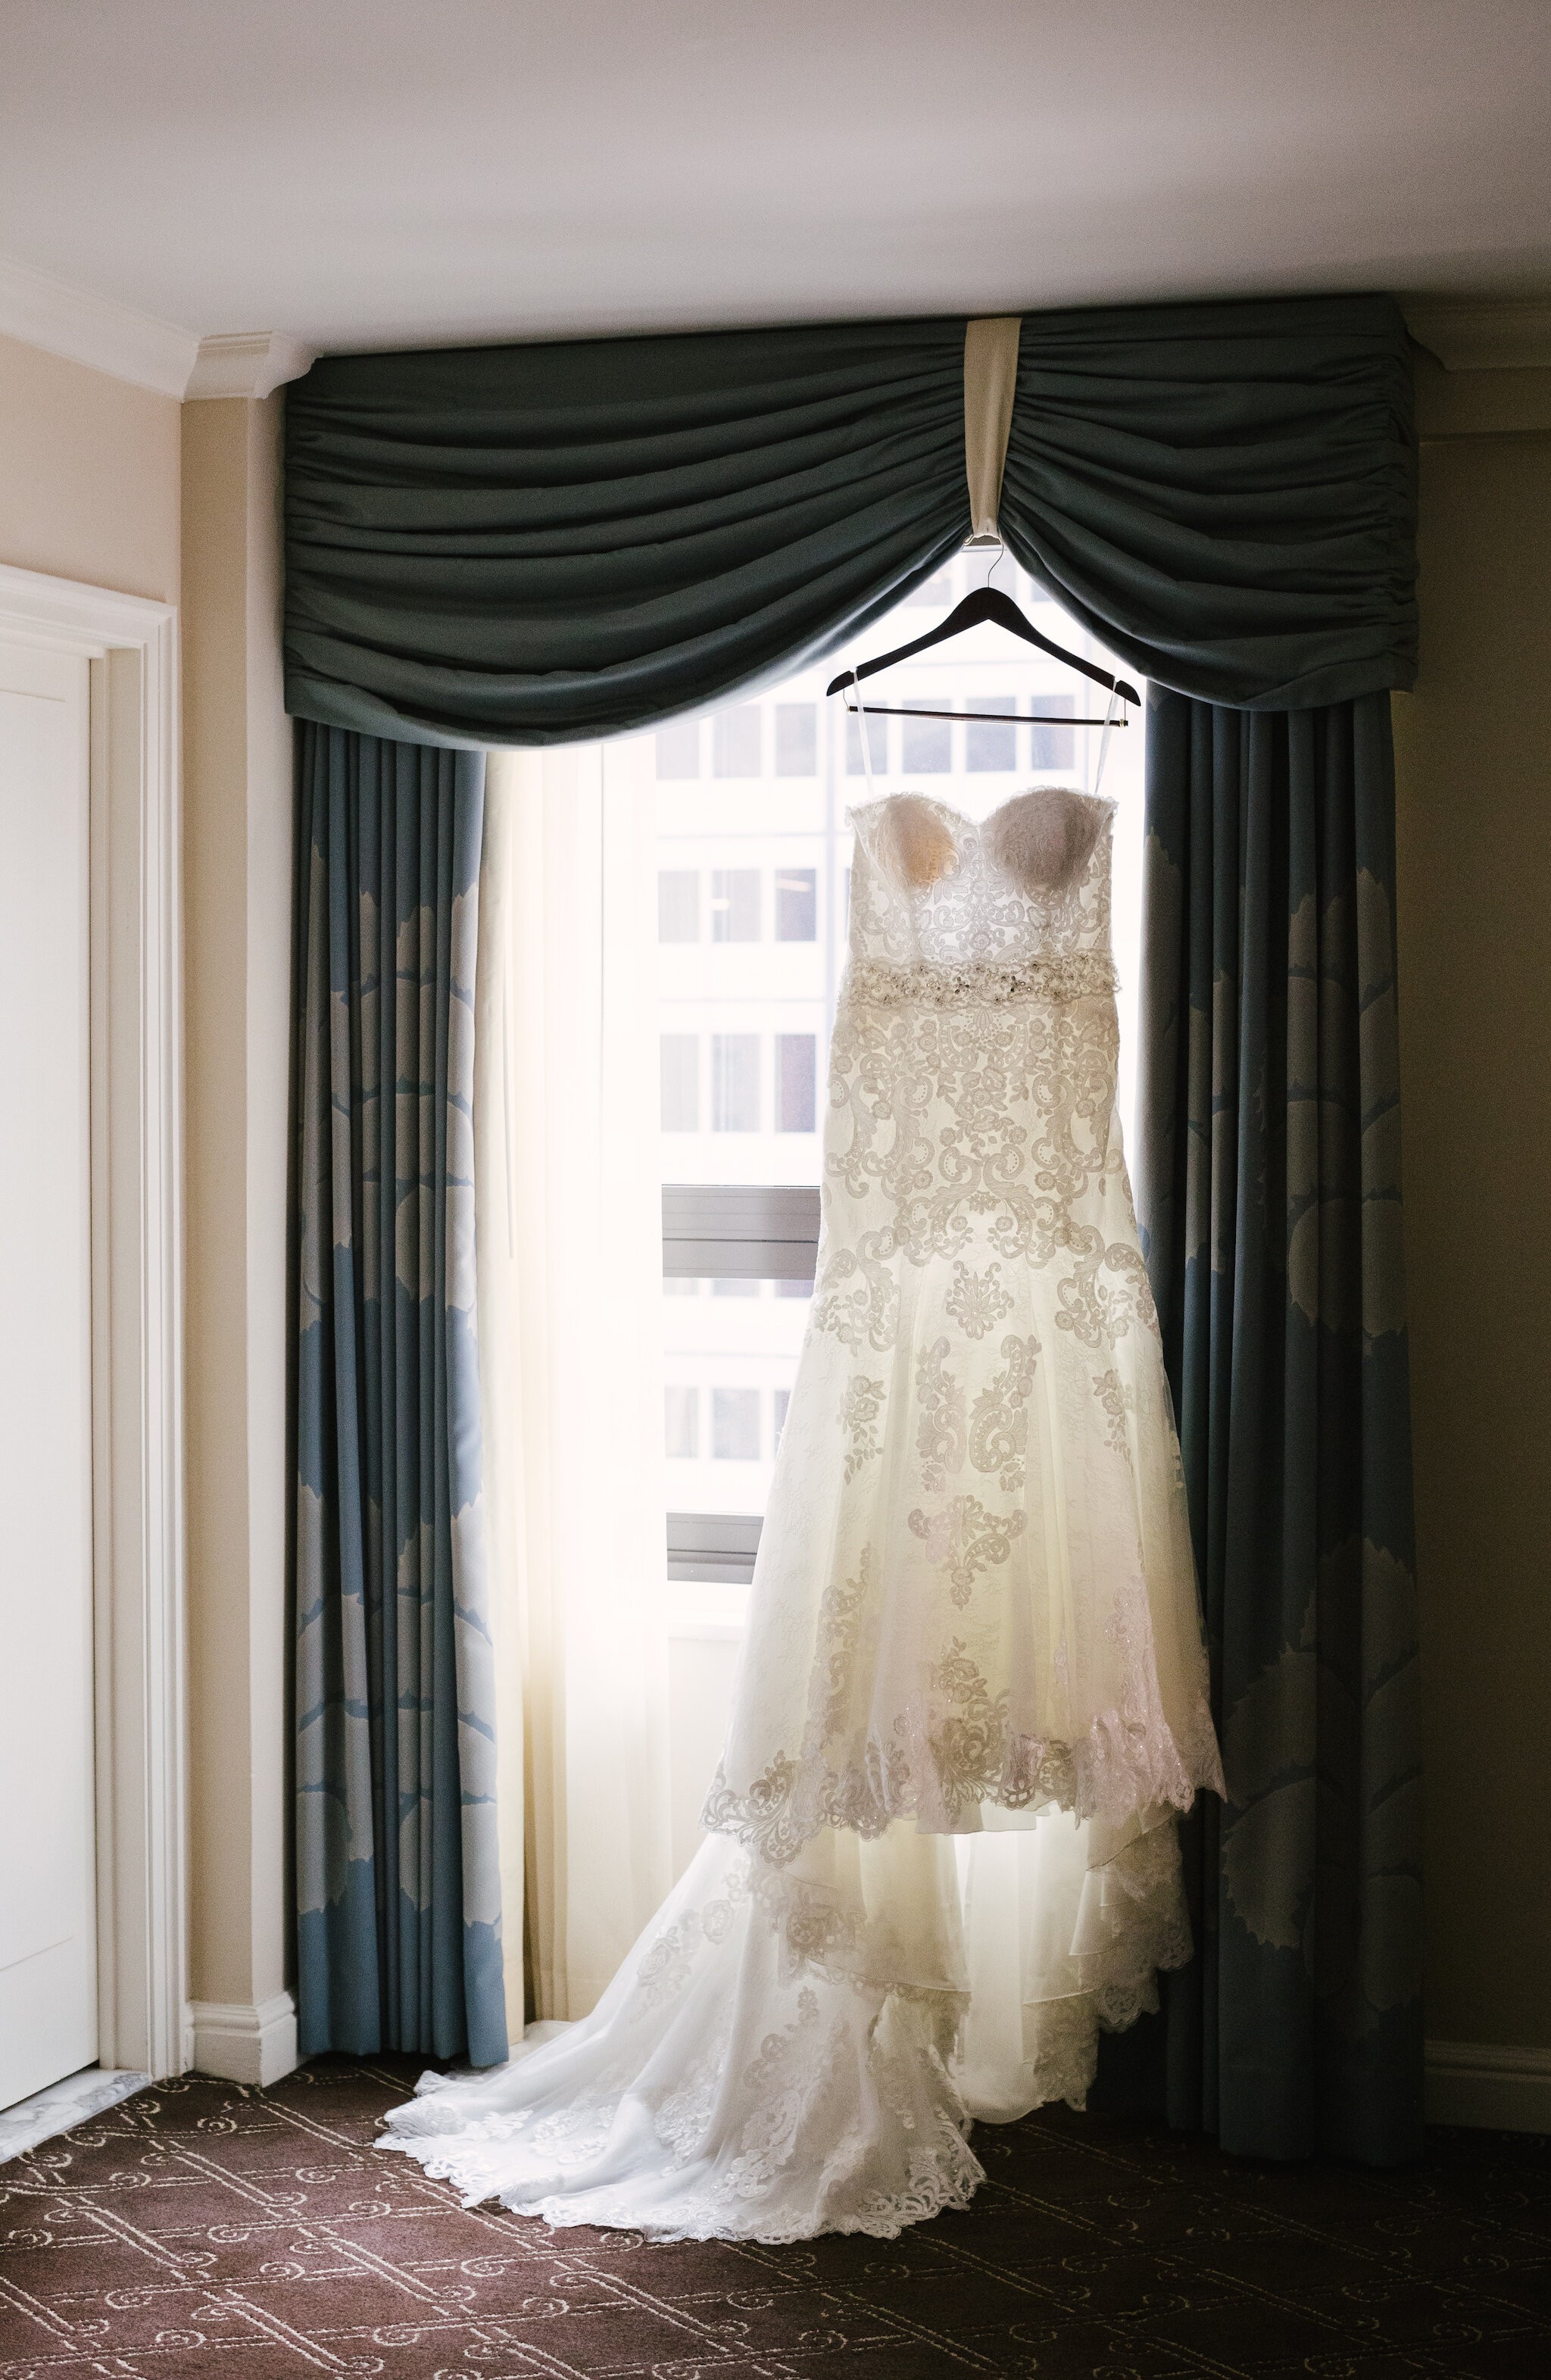 Lace Wedding Dress: Elegant Jewel-Toned Wedding captured by Dorey Kronick featured on CHI thee WED